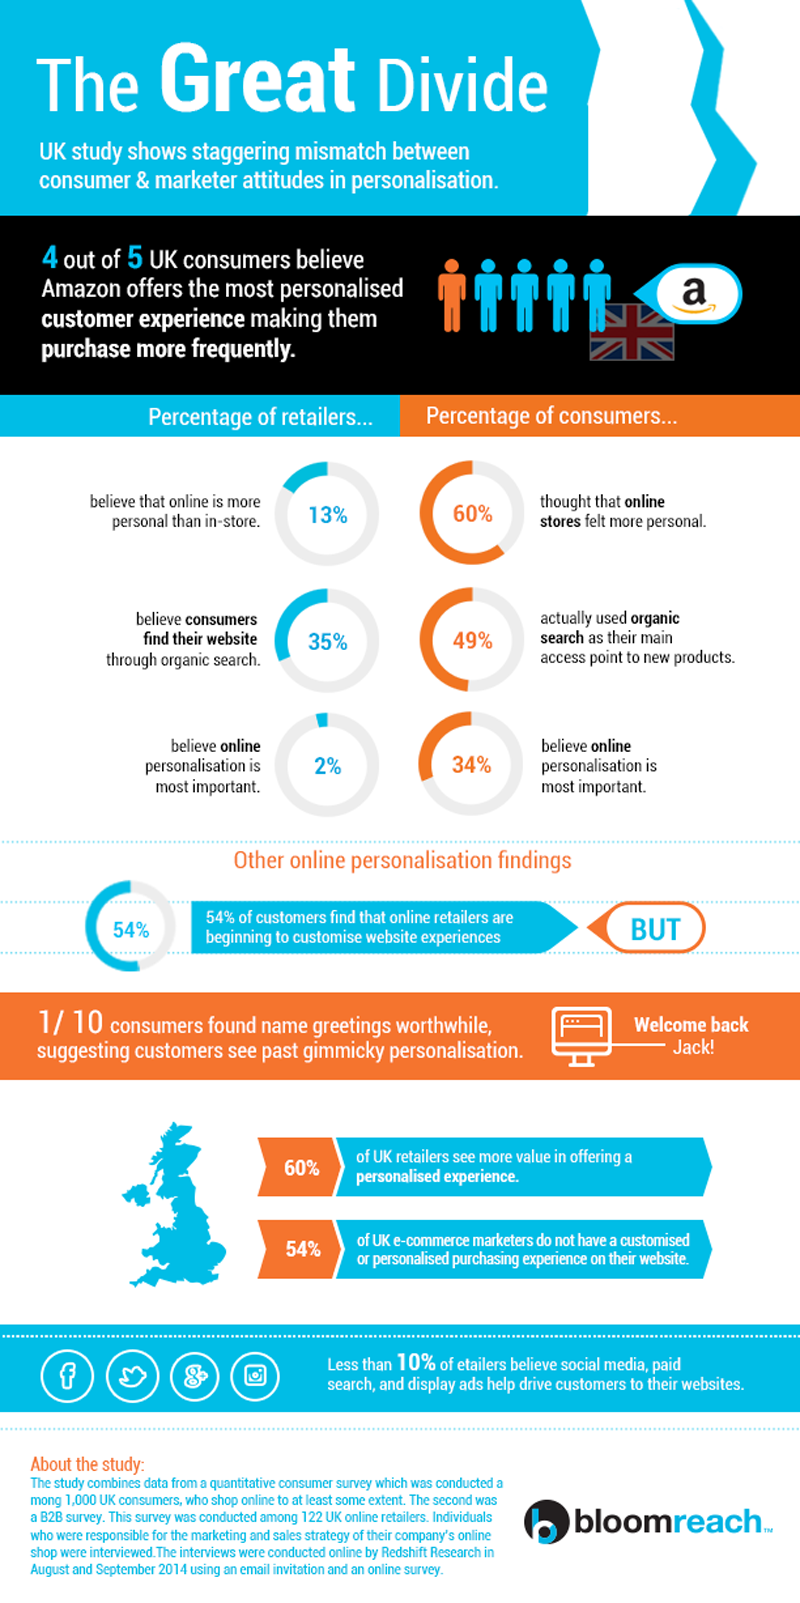 Photo: infographics on the findings of The 2014 Consumer and Marketer Personalisation Study